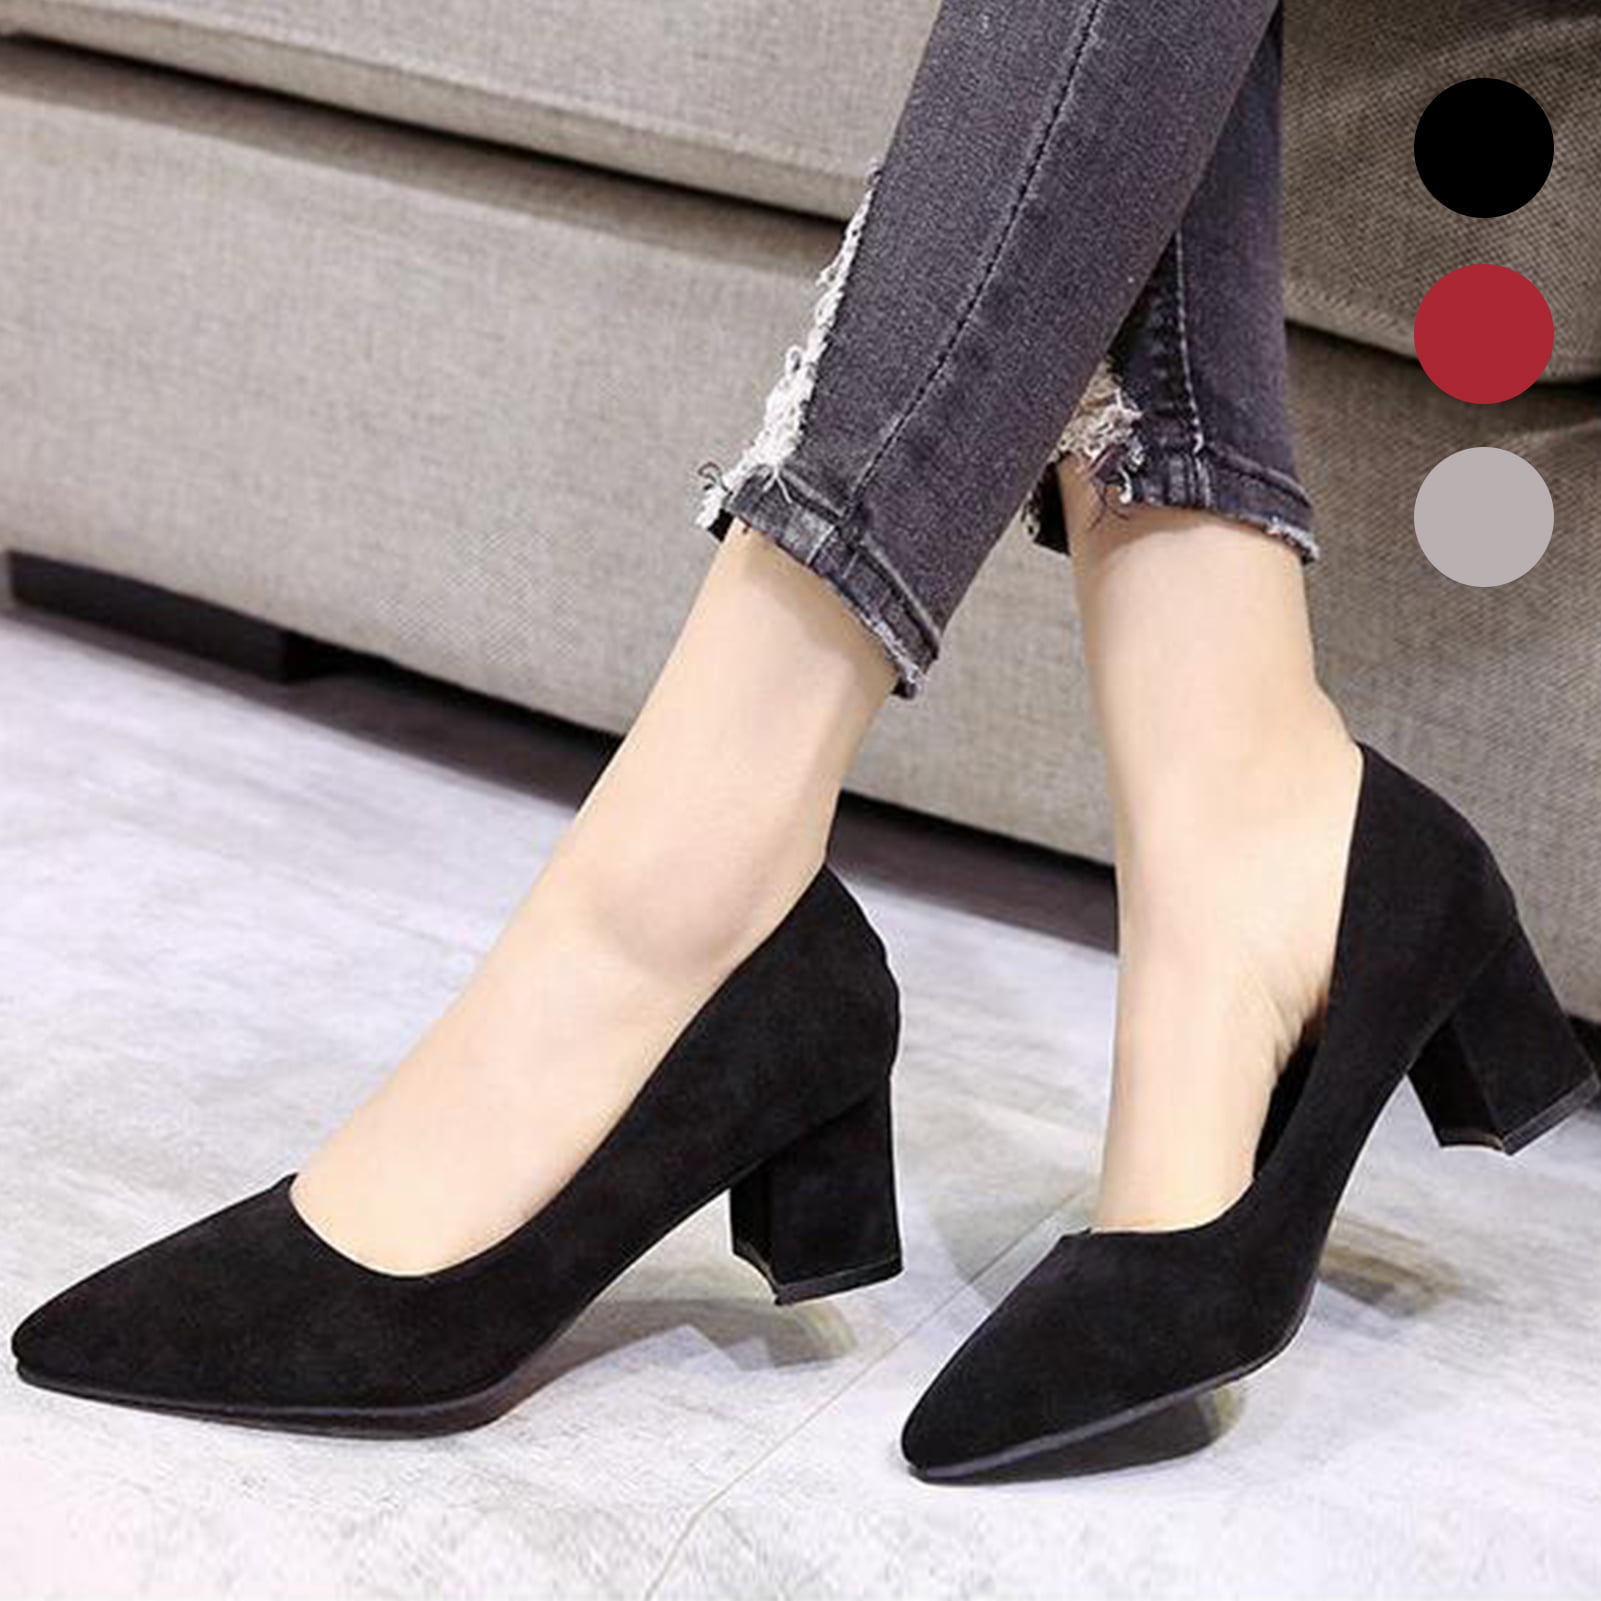 Handmade Comfortable Work Office Shoes Nine Seven Womens Suede Leather Clear Pointed Toe Bow Pumps